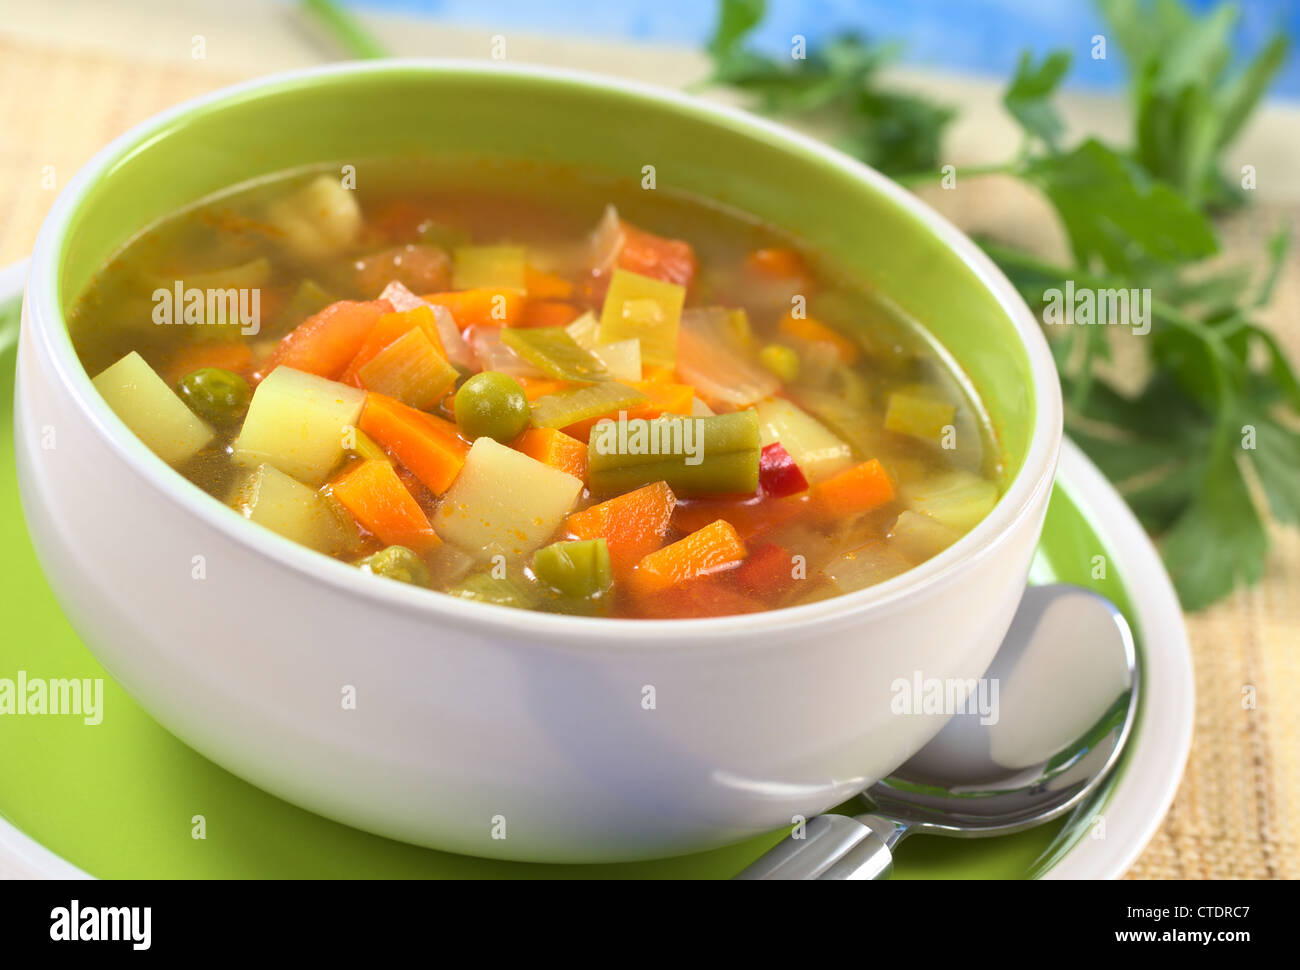 Close up view of a wooden table with a fresh, ready-to-eat homemade  vegetable soup. Stock Photo by lucigerma